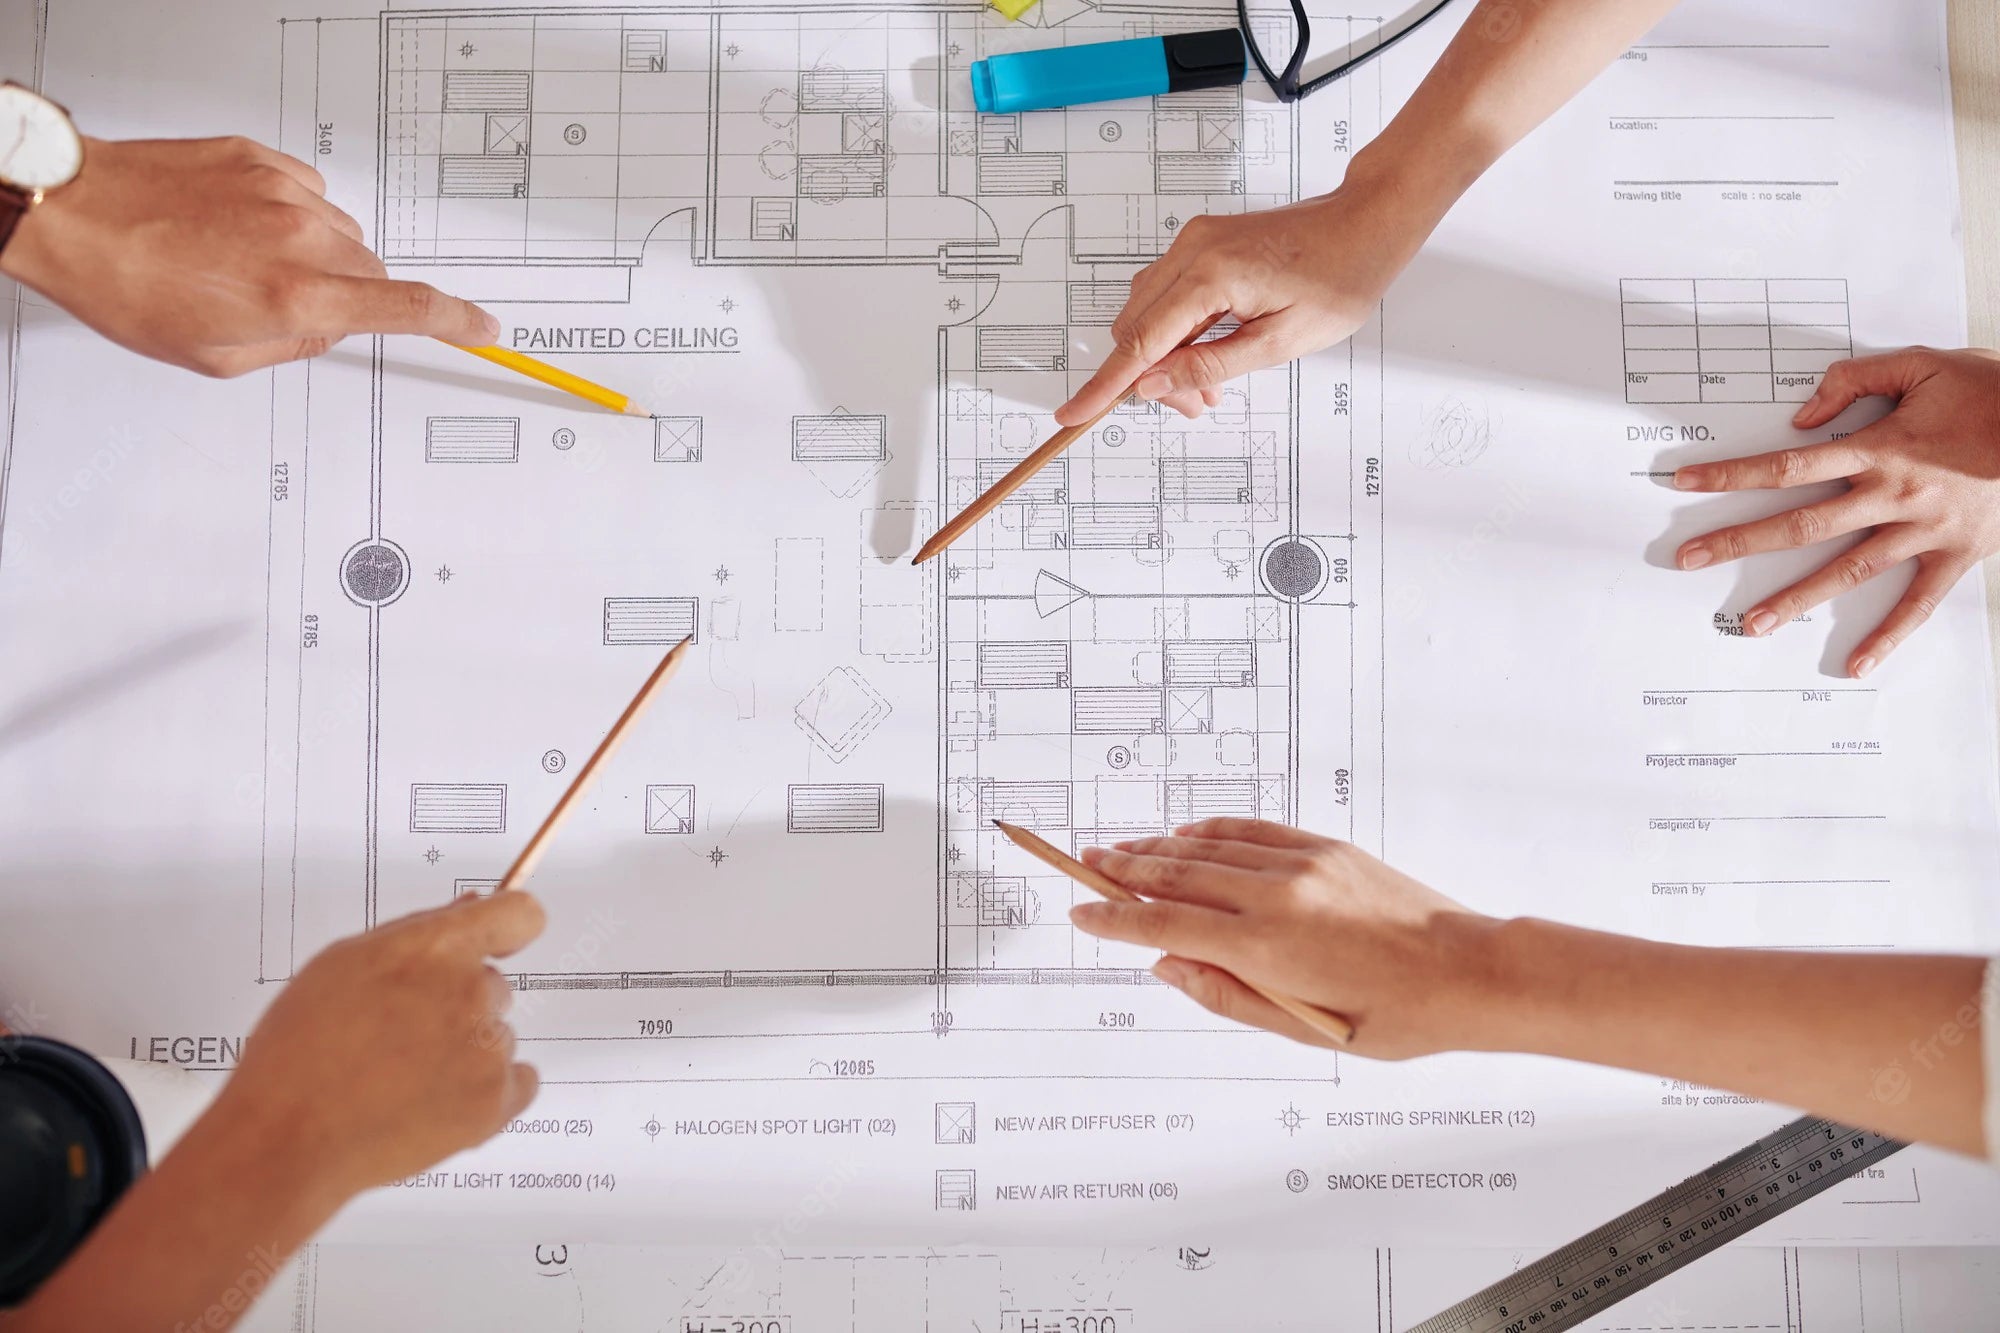 hands-architects-designers-pointing-blueprint-table-when-discussing-future-interior-design-project_274689-20802